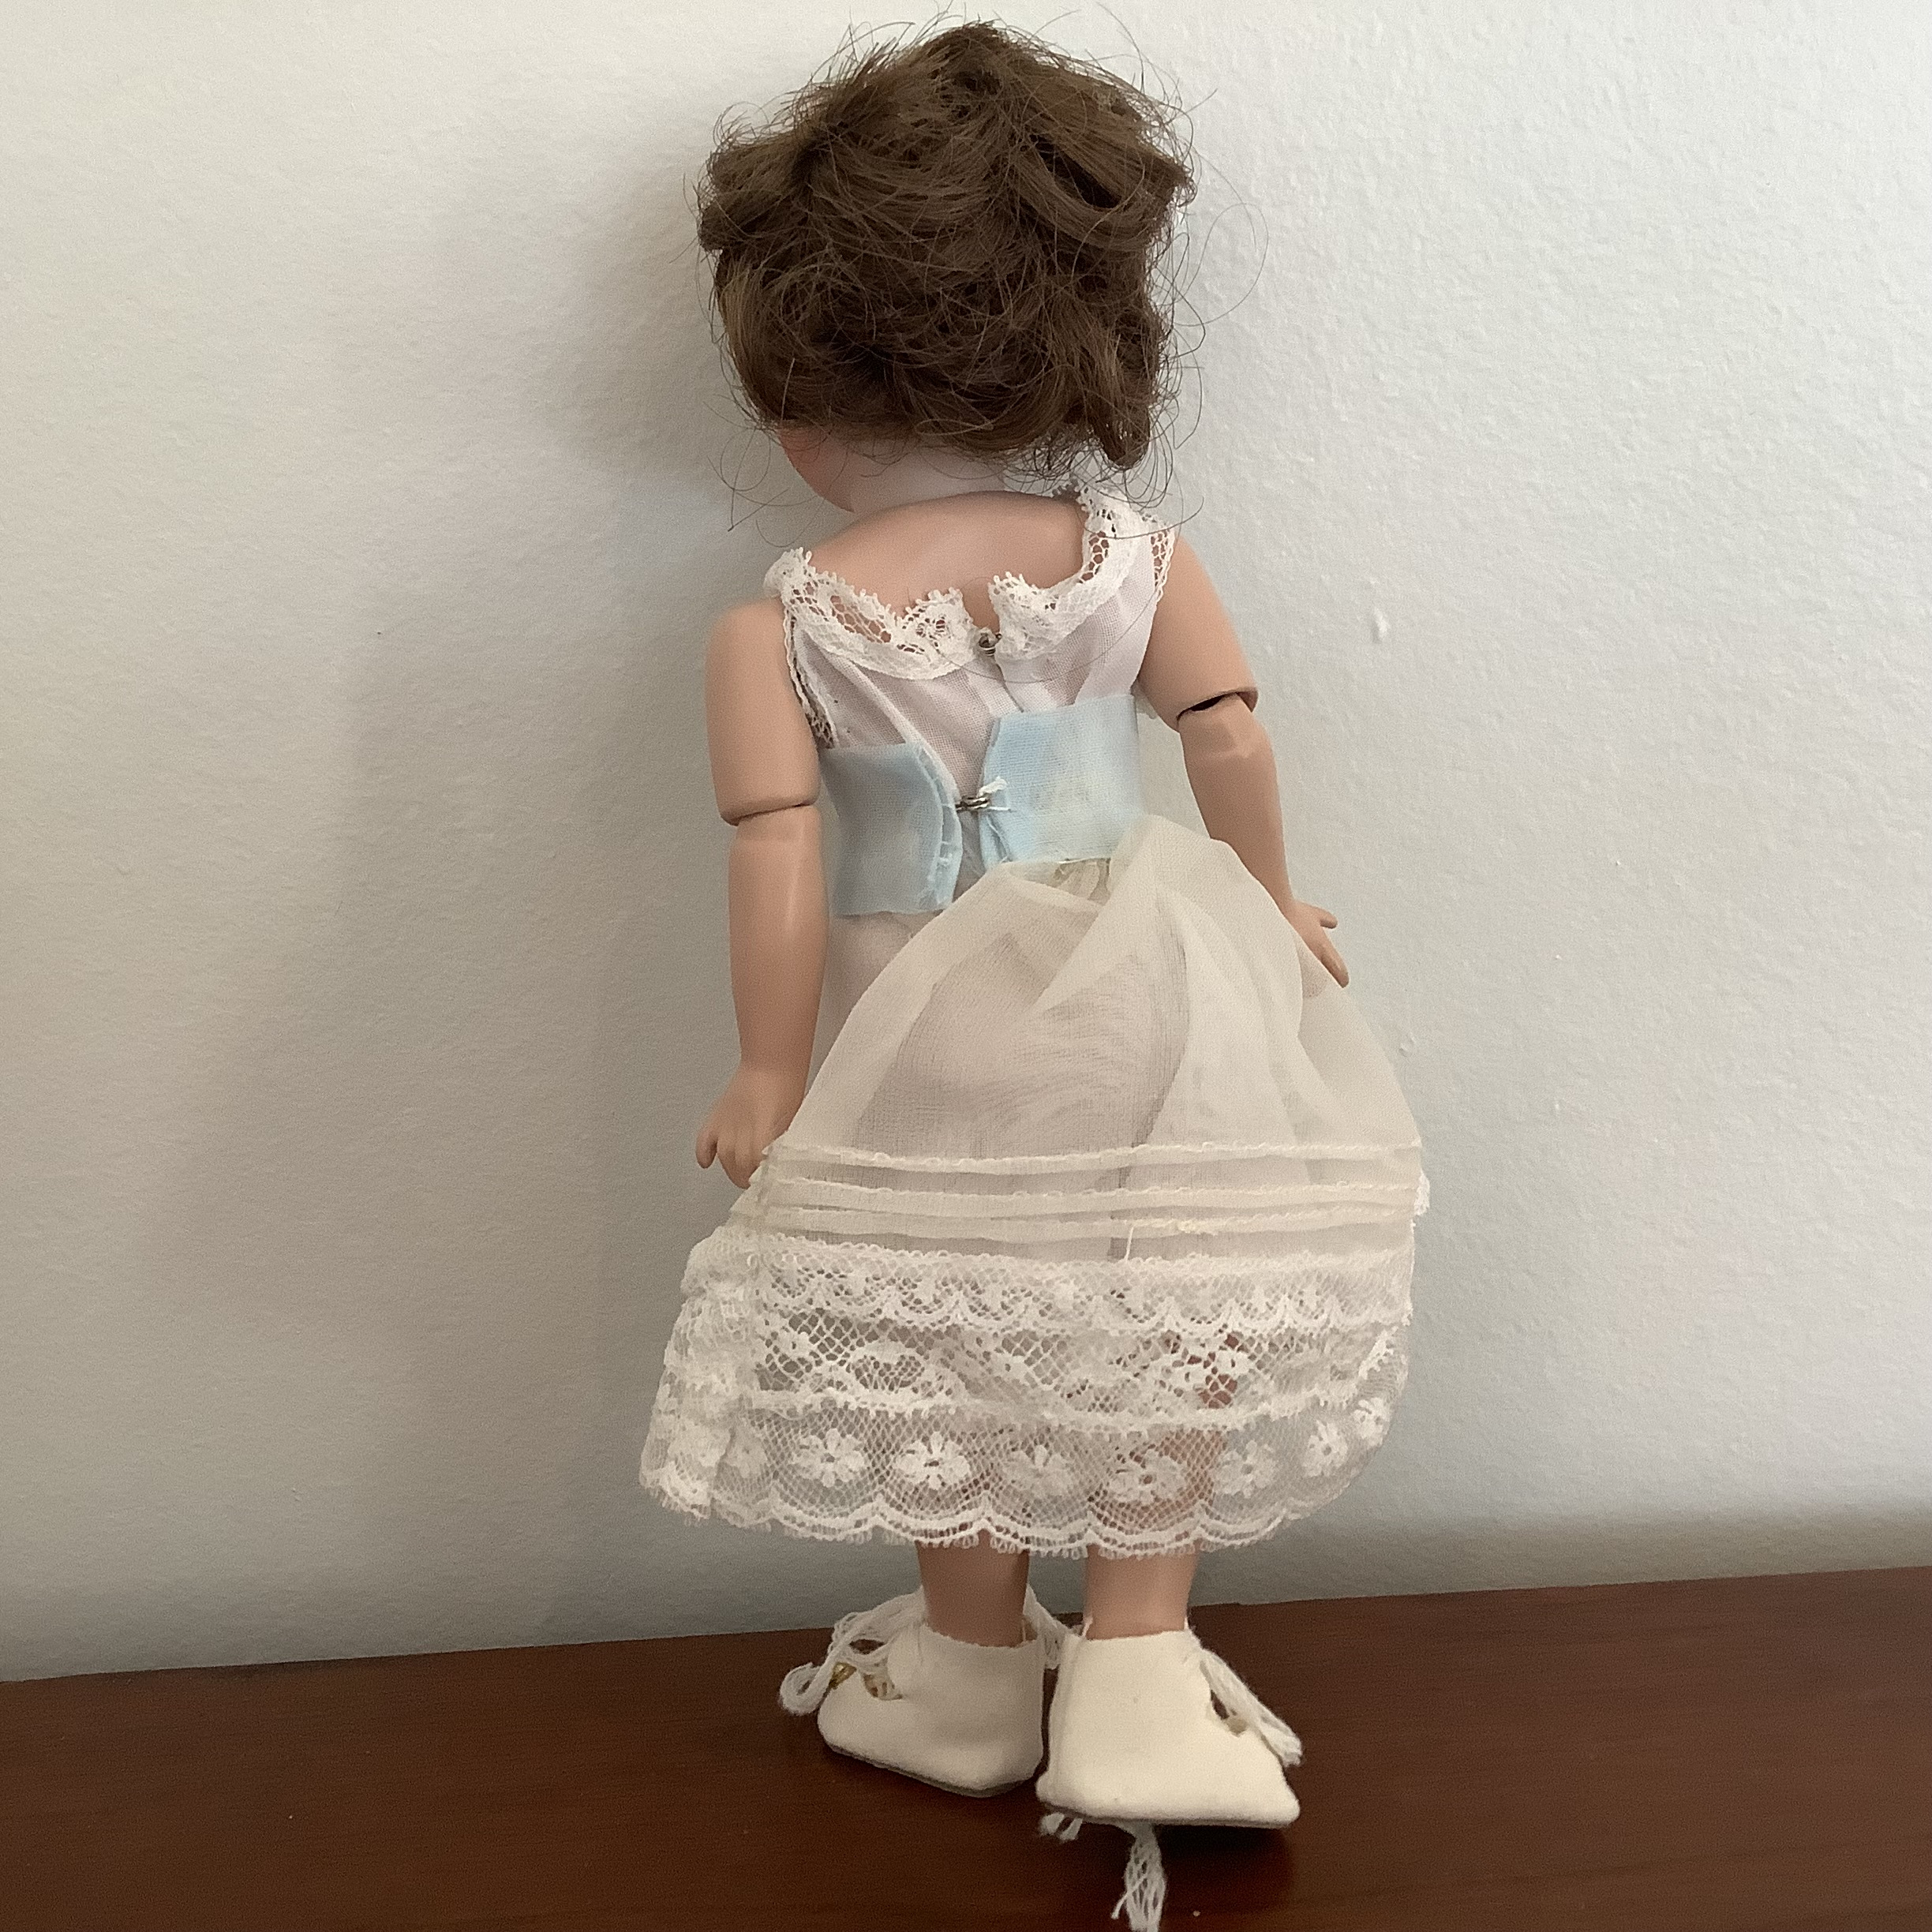 Doll to dress